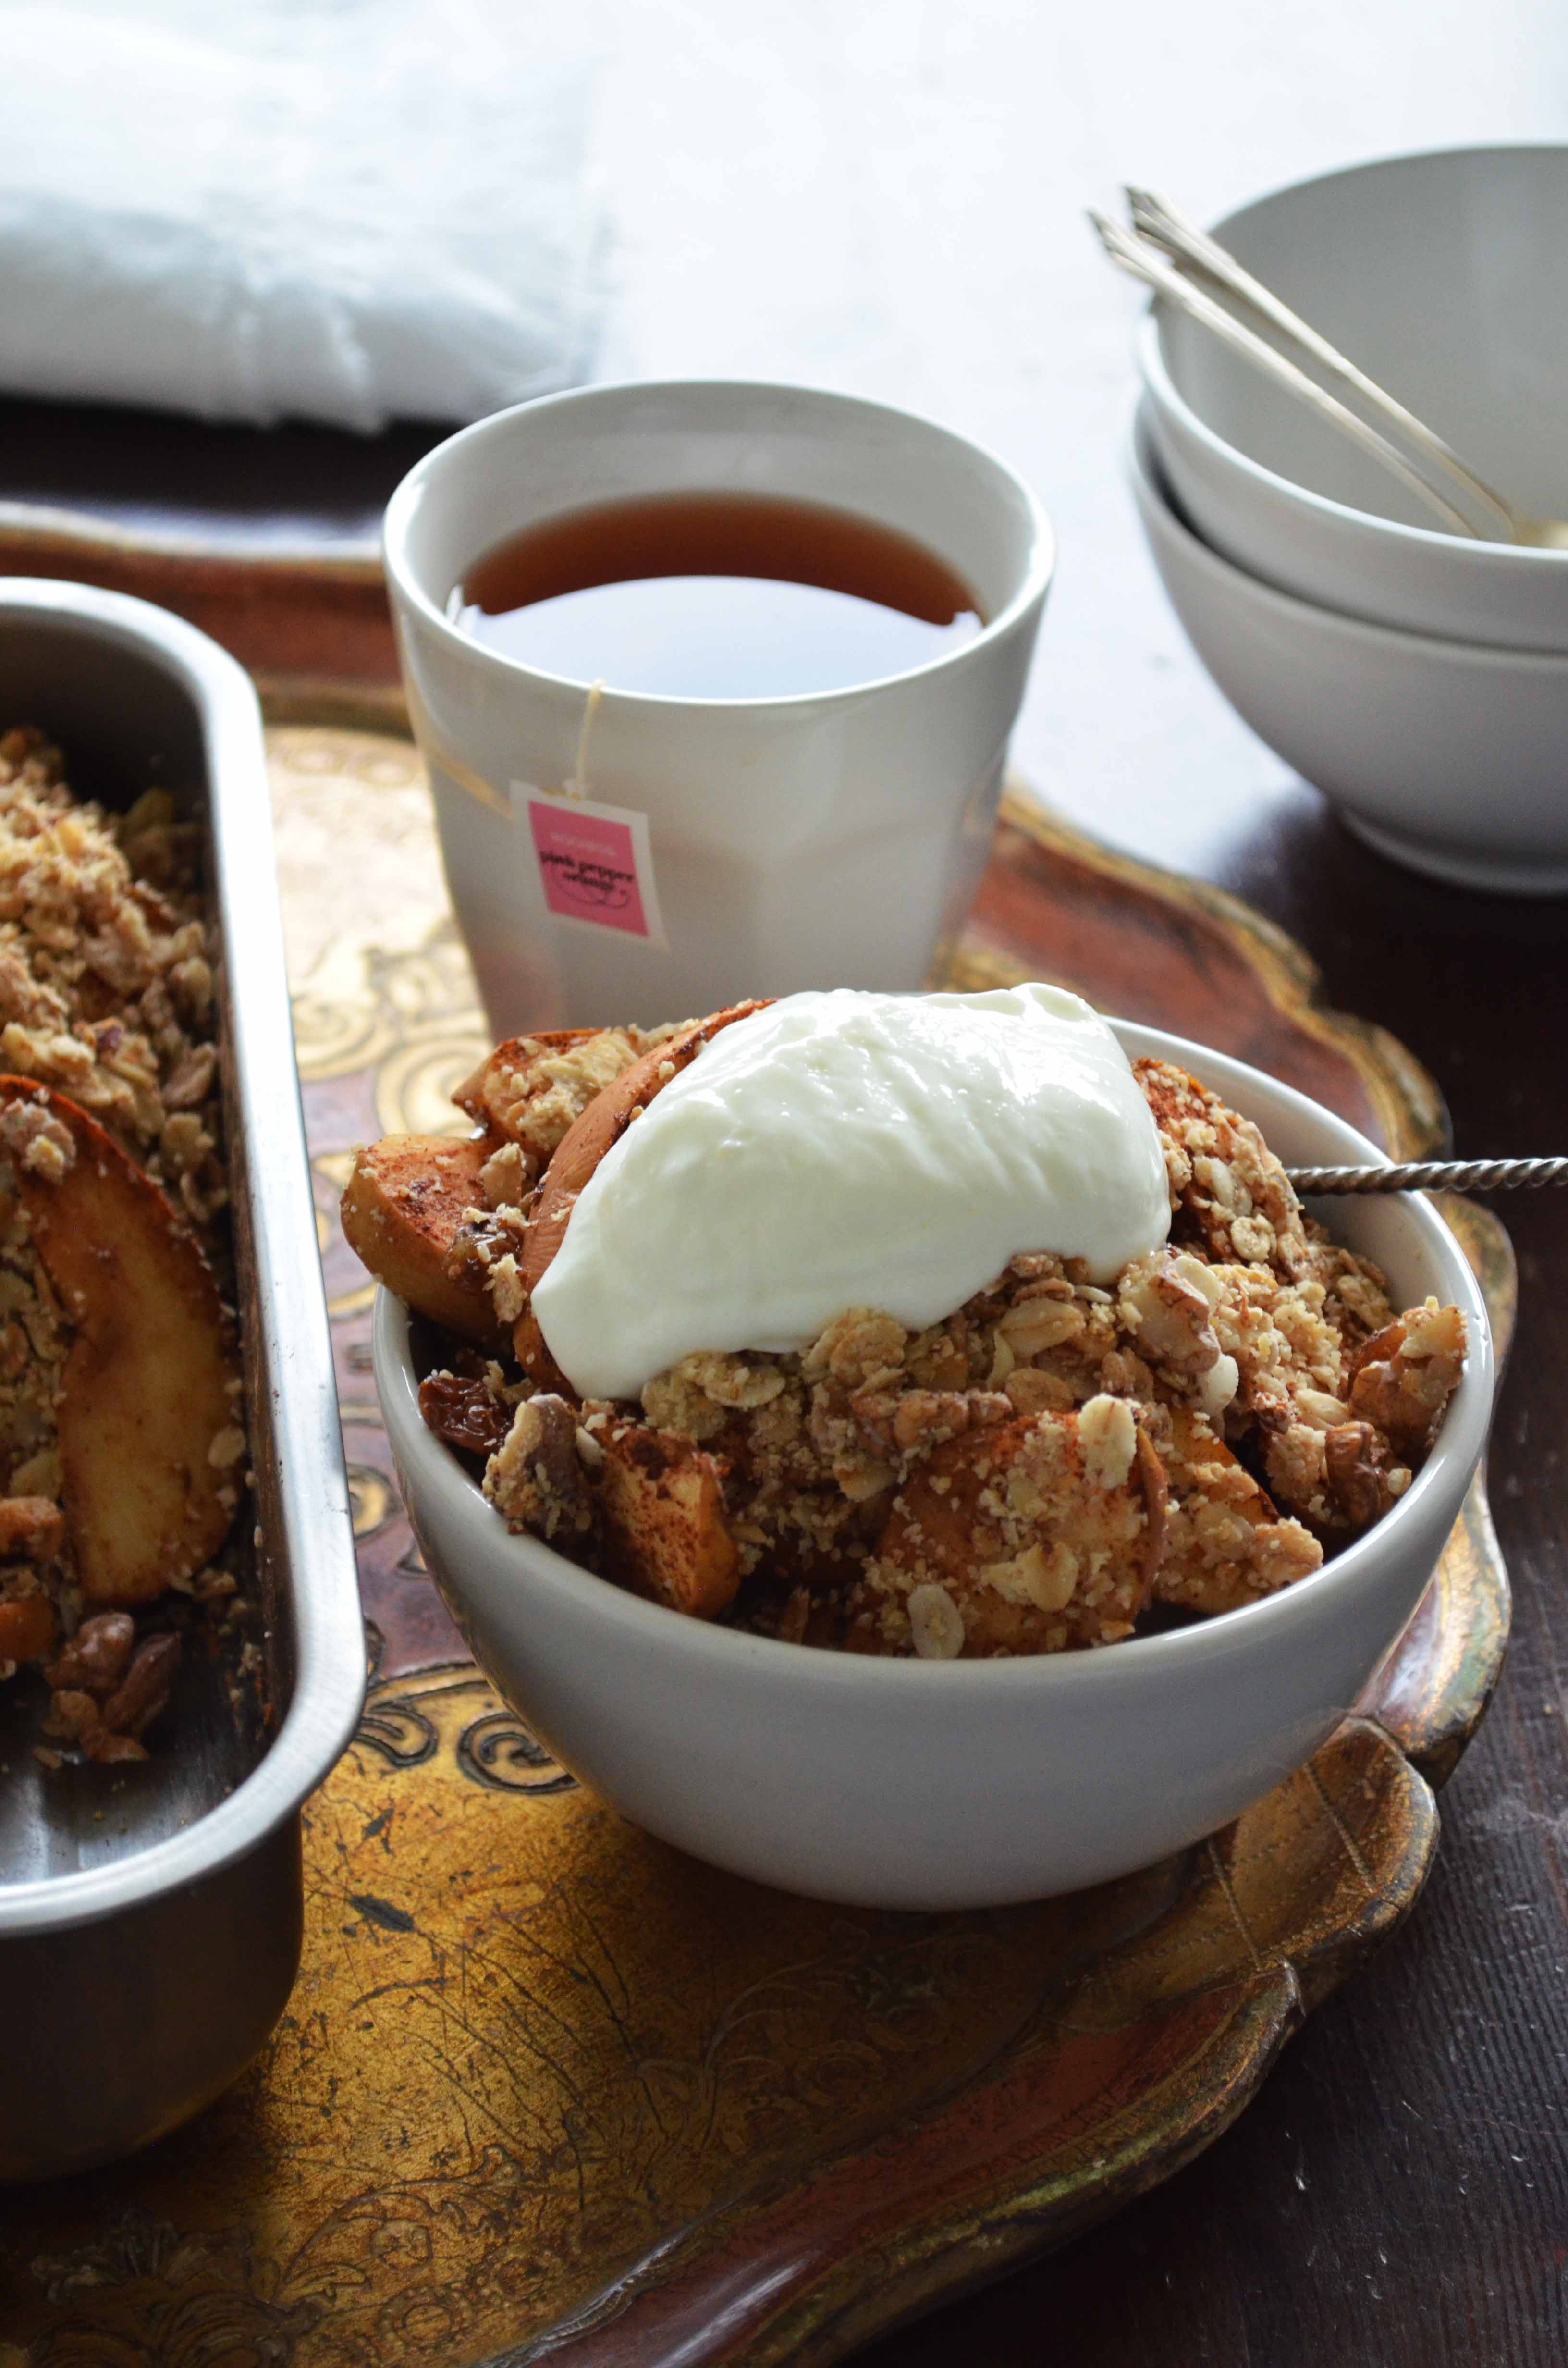 A delicious Baked Apple Crisp recipe from That Healthy Kitchen. This version is gluten free and vegan, and naturally sweetened. Find the recipe on www.thathealthykitchen.com/baked-apple-crisp